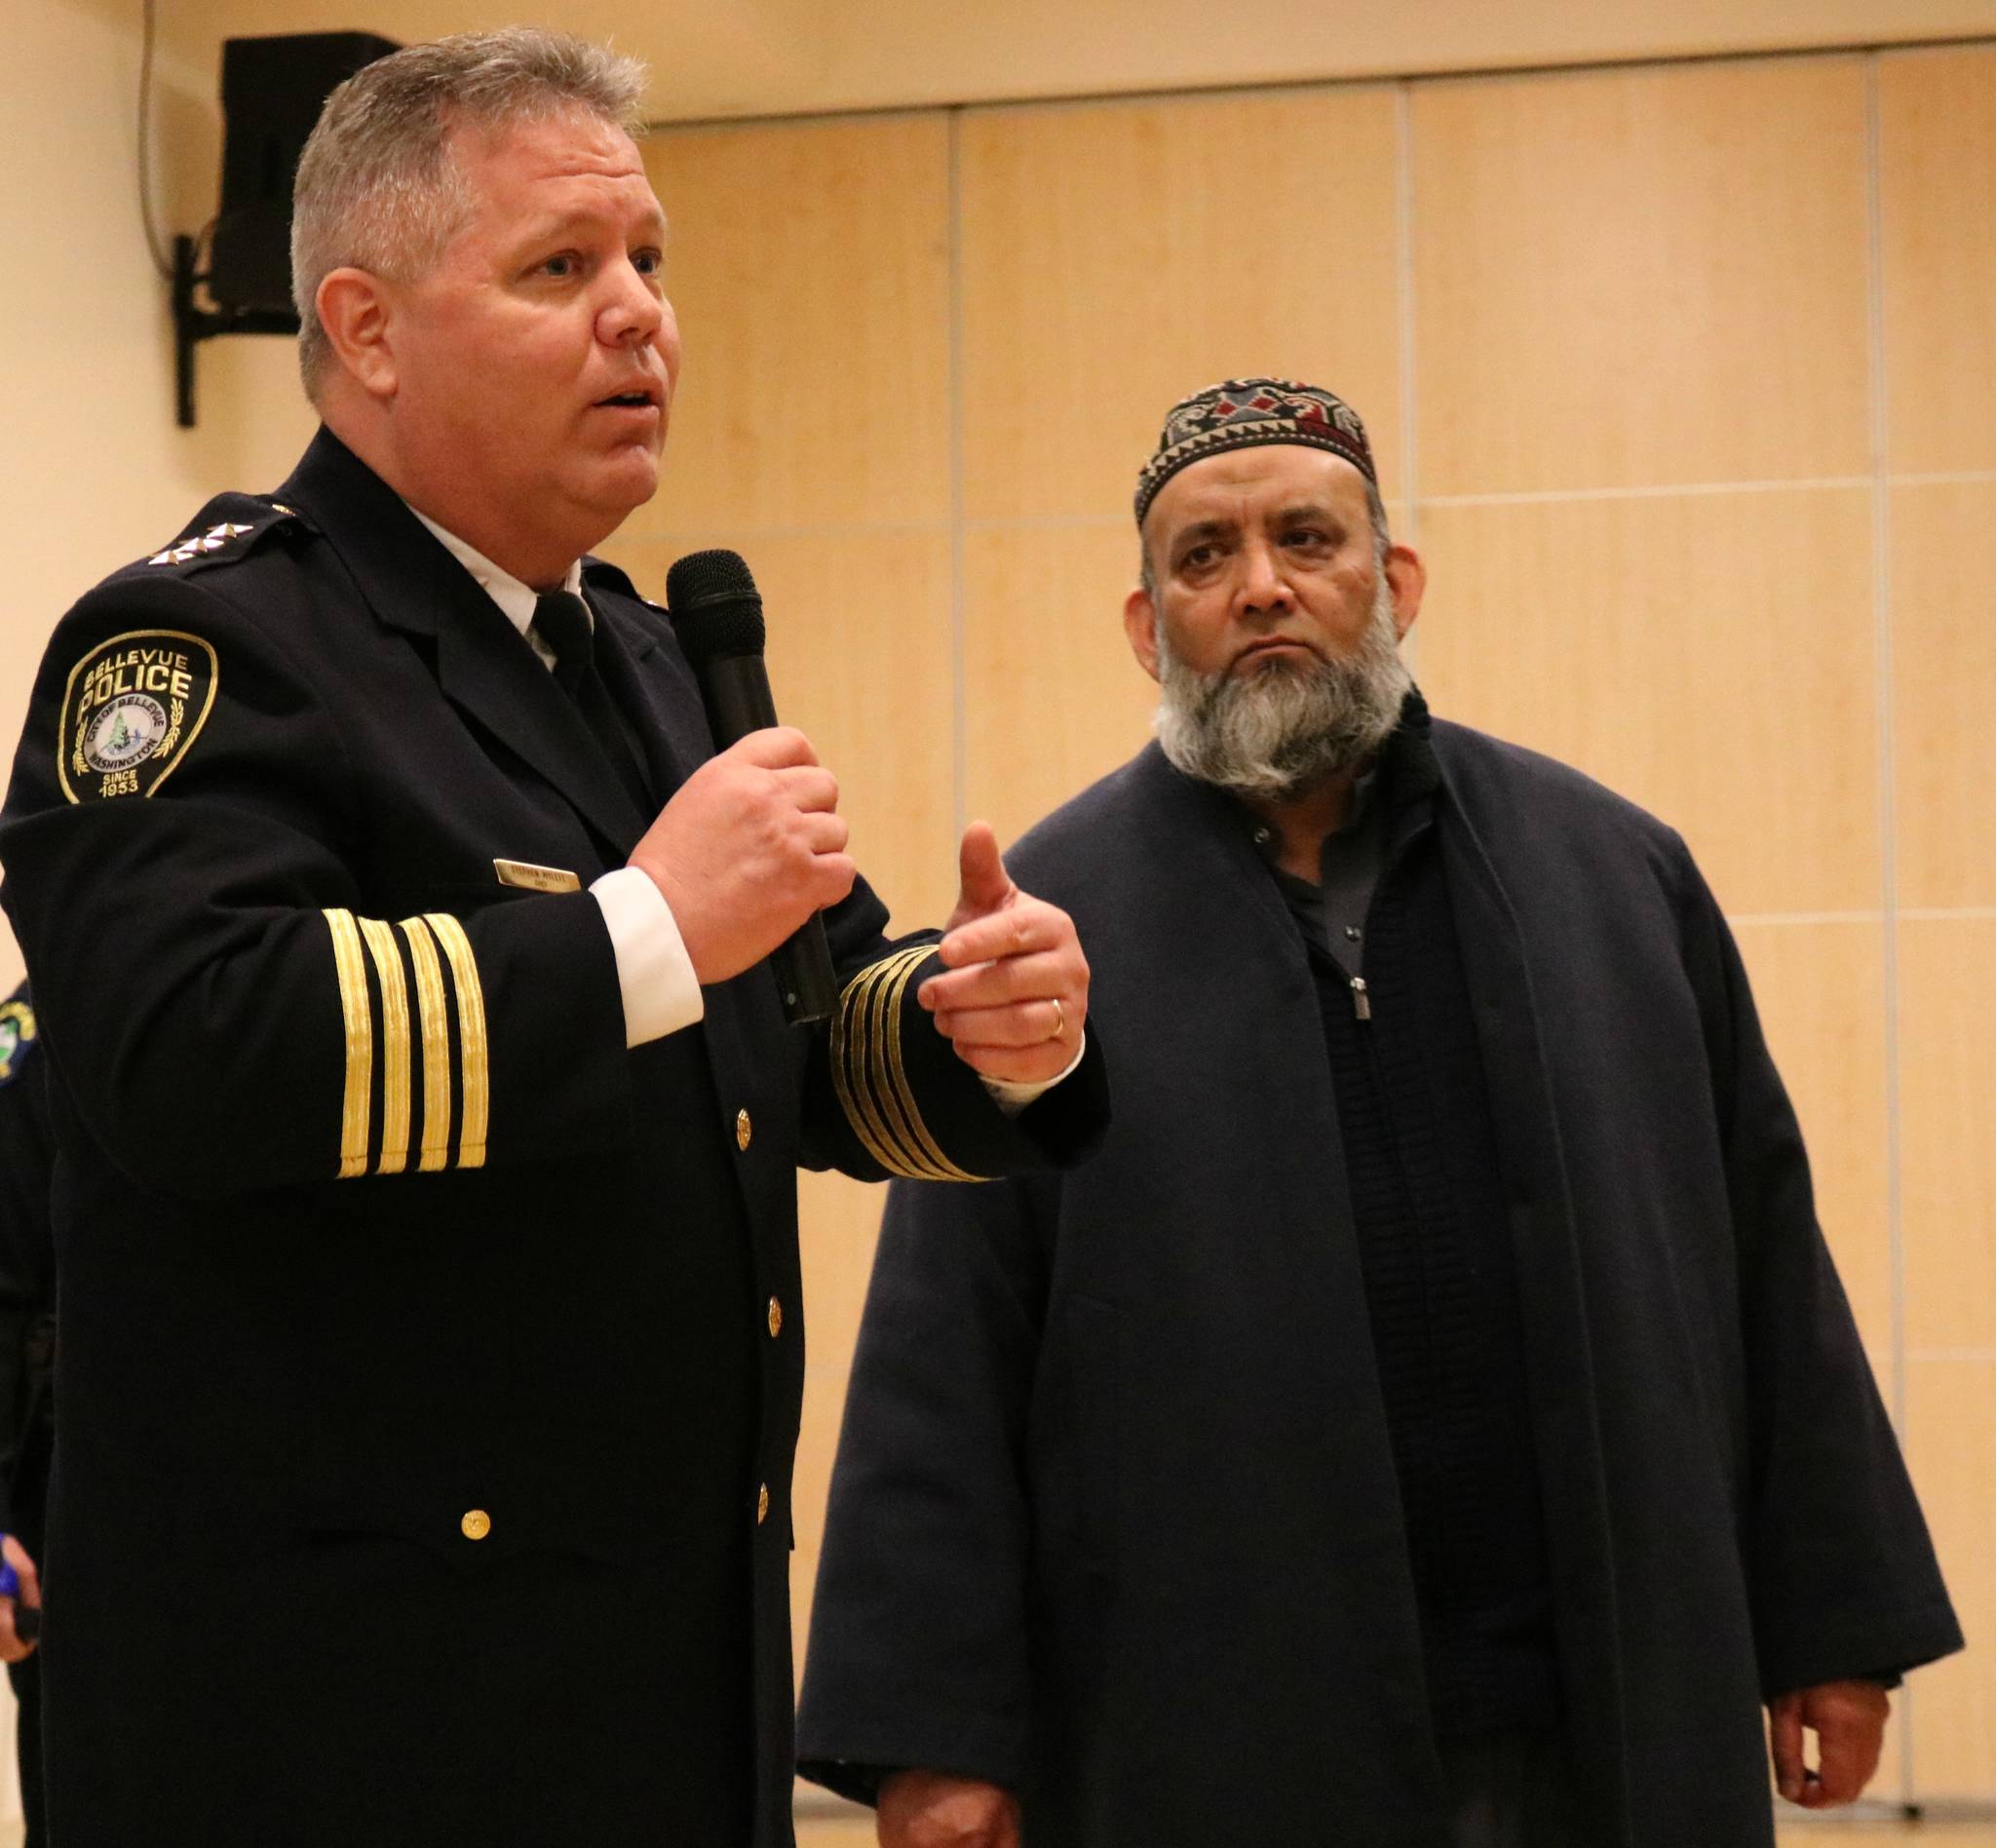 Bellevue Police Department Chief Steven Mylett interacts with Imam Sheikh Fazal of the Islamic Center of Eastside during the Eastside Muslim Safety Forum in January at the Muslim Association of Puget Sound in Redmond. Andy Nystrom, Redmond Reporter